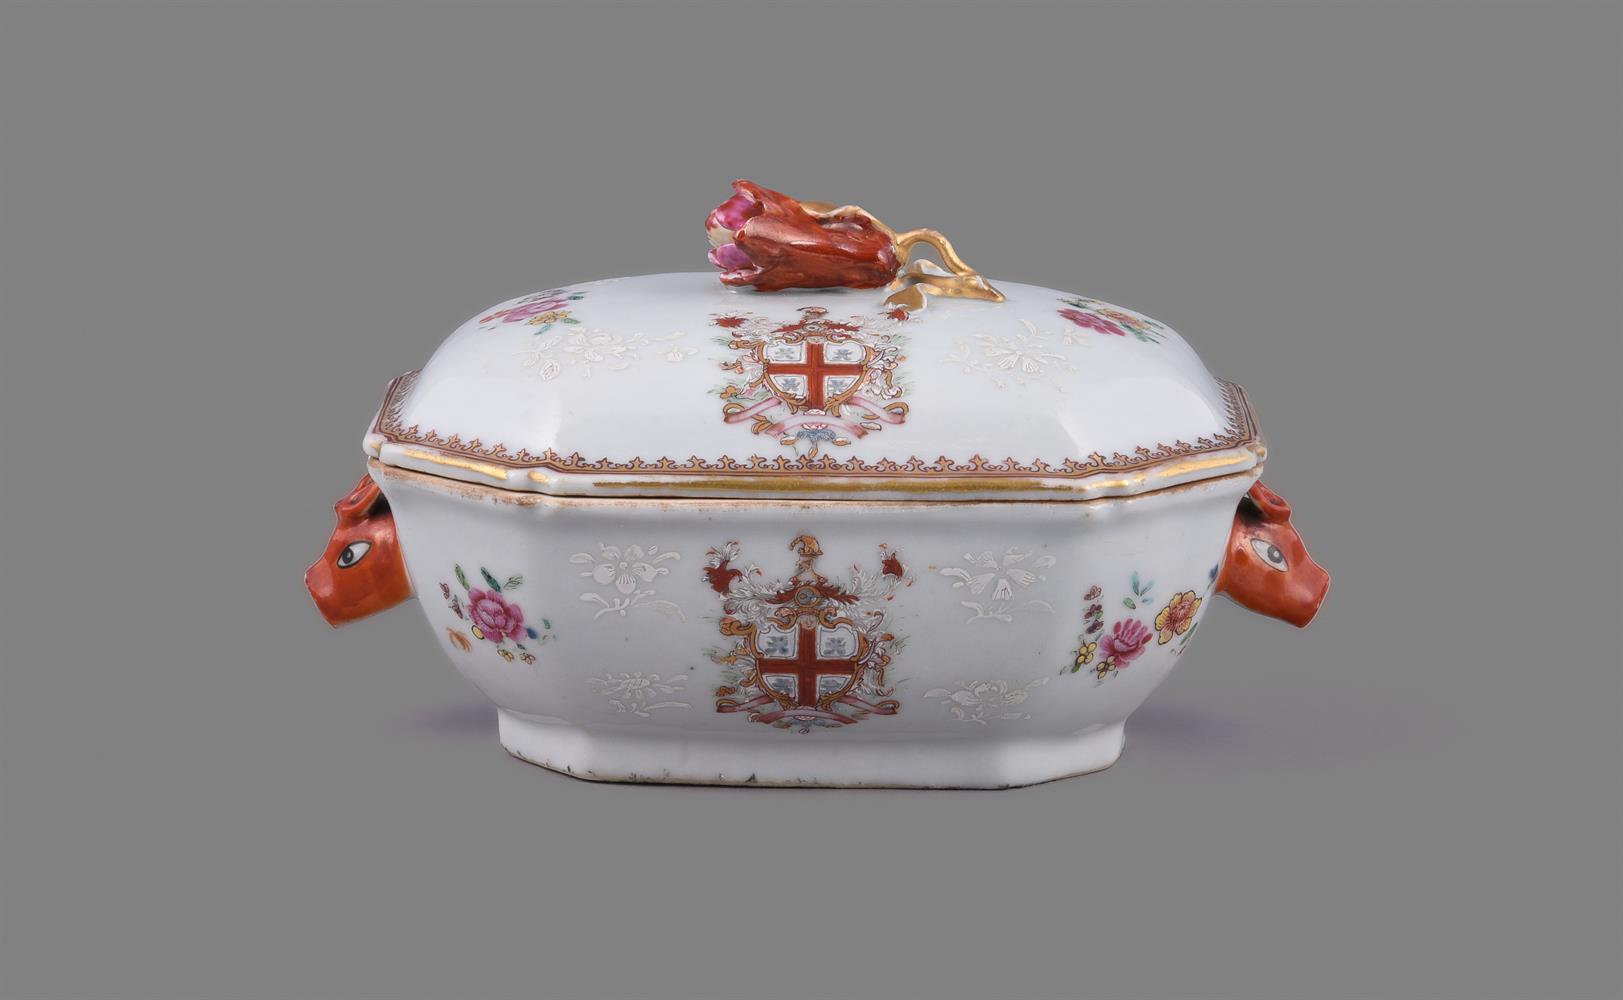 A Chinese export porcelain famille rose armorial octagonal-shaped sauce tureen and cover